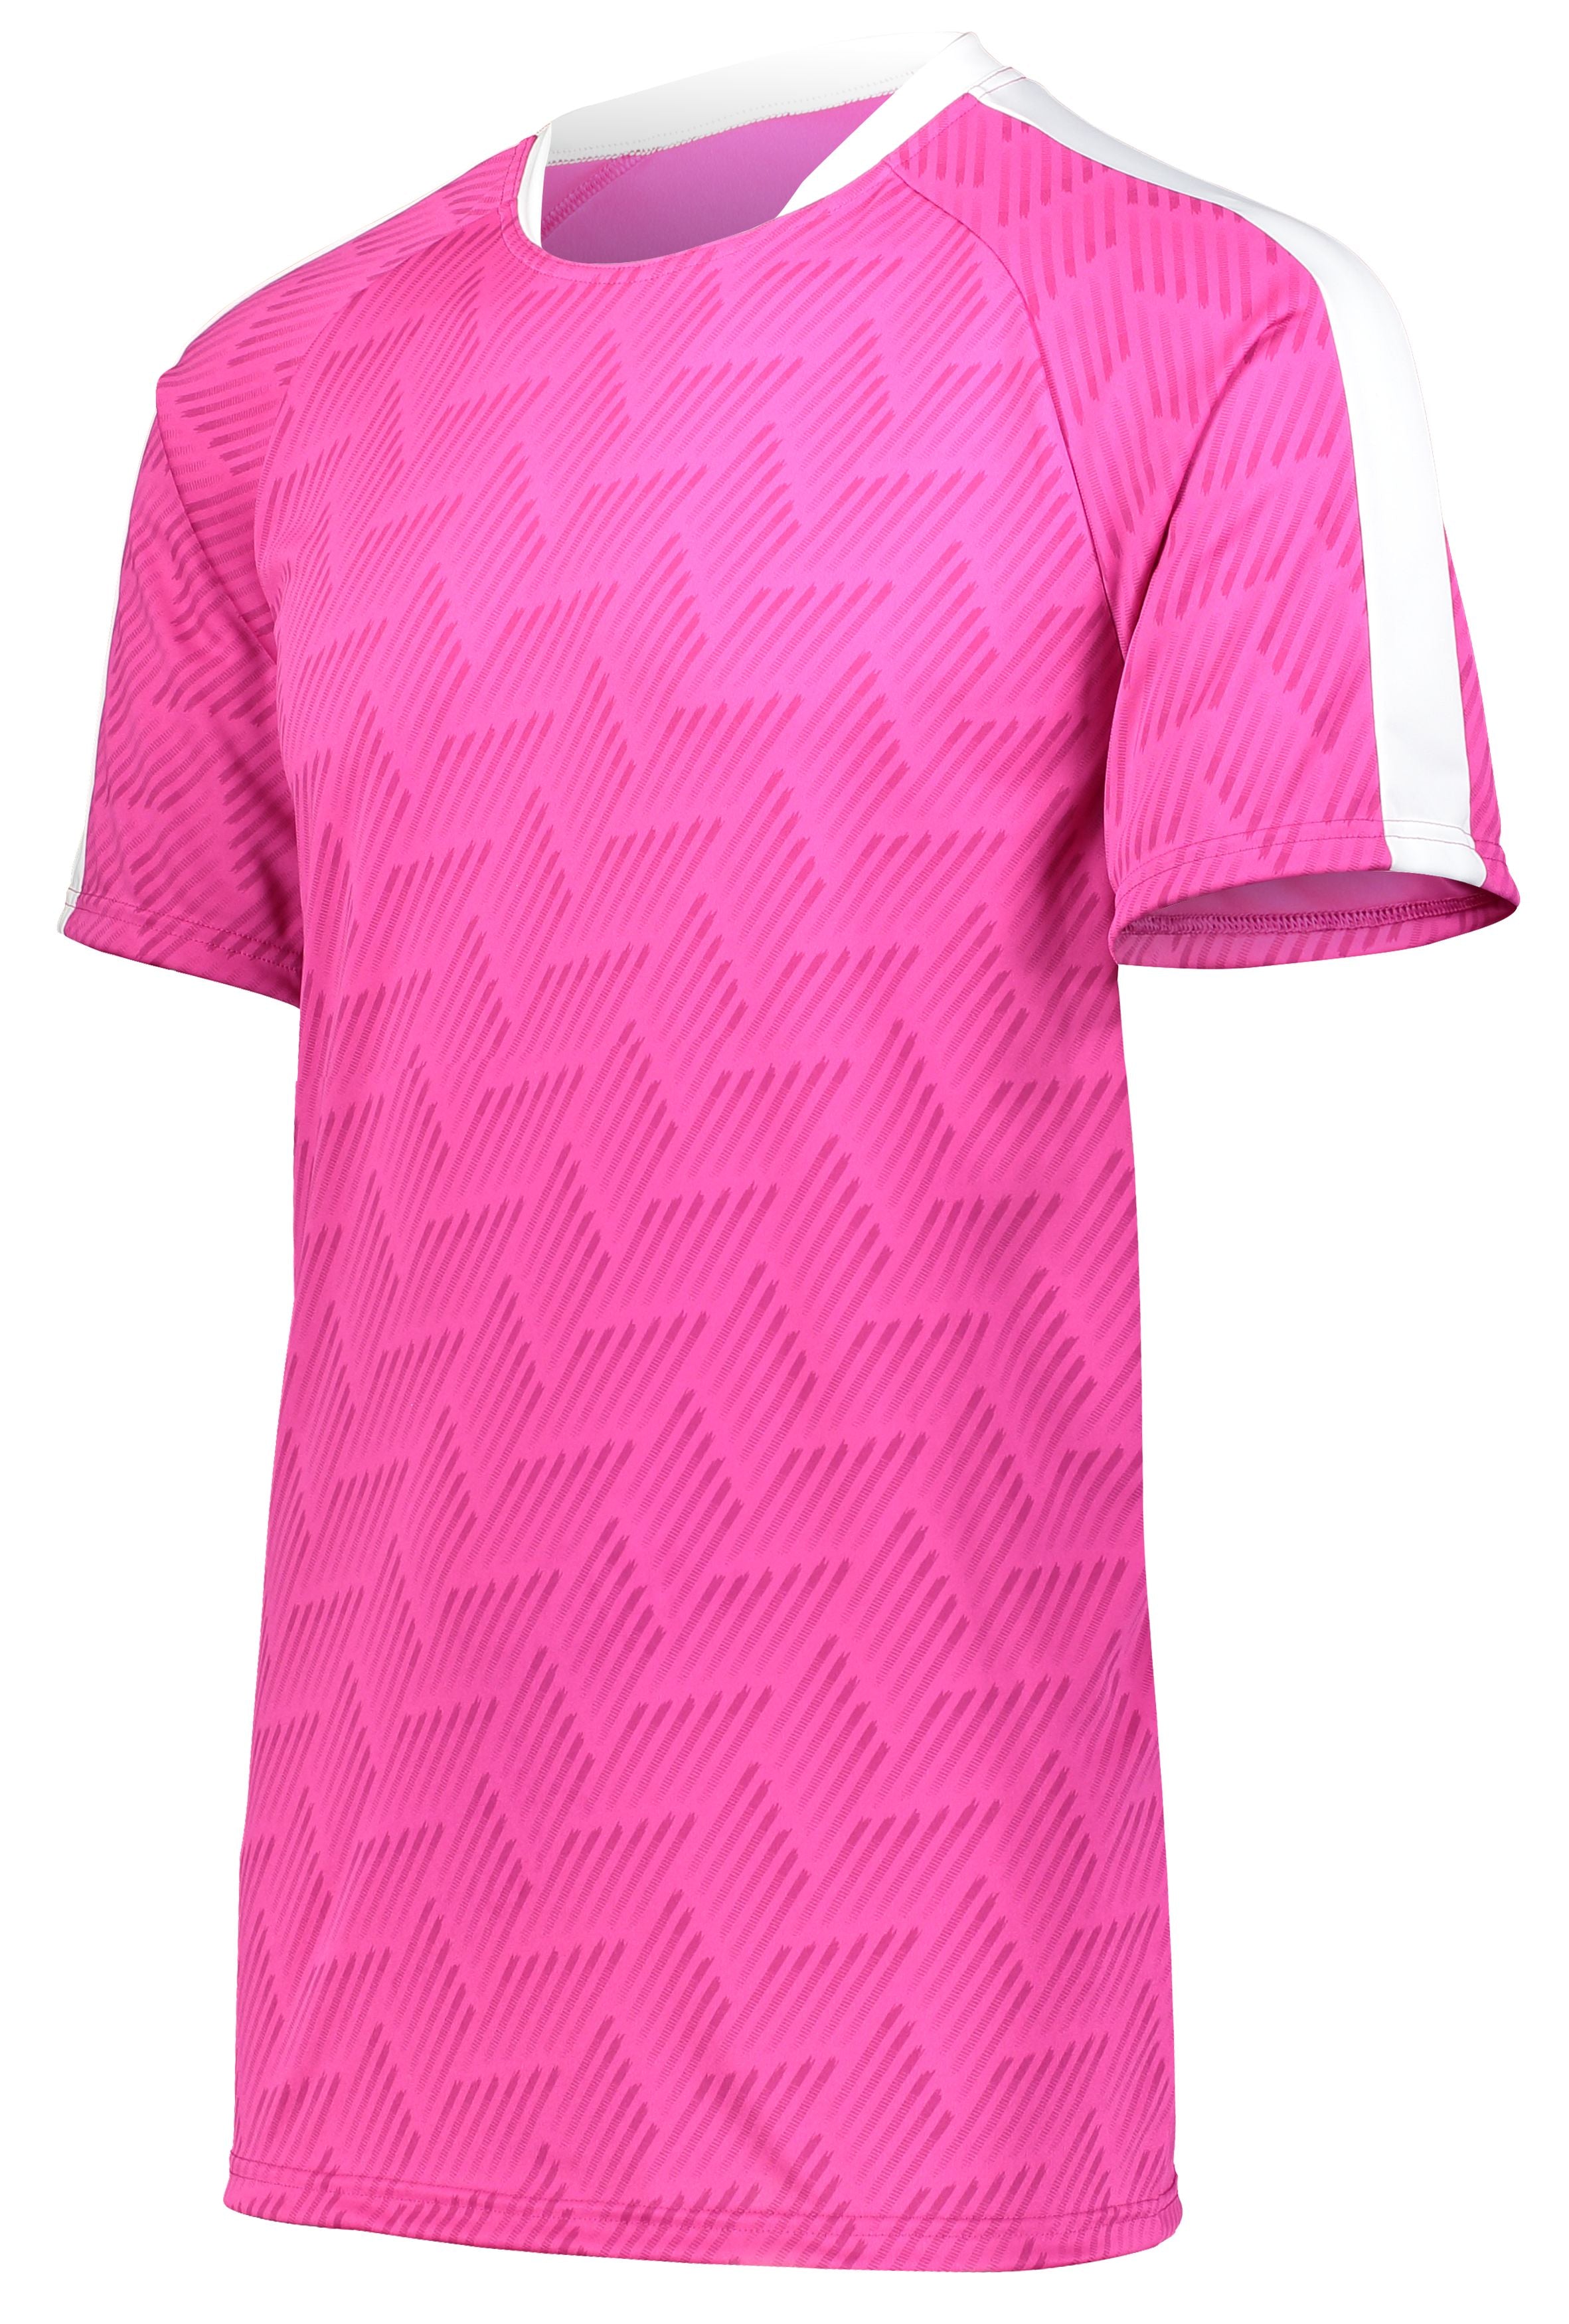 High 5 Hypervolt Jersey in Power Pink Print/White  -Part of the Adult, Adult-Jersey, High5-Products, Soccer, Shirts, All-Sports-1 product lines at KanaleyCreations.com